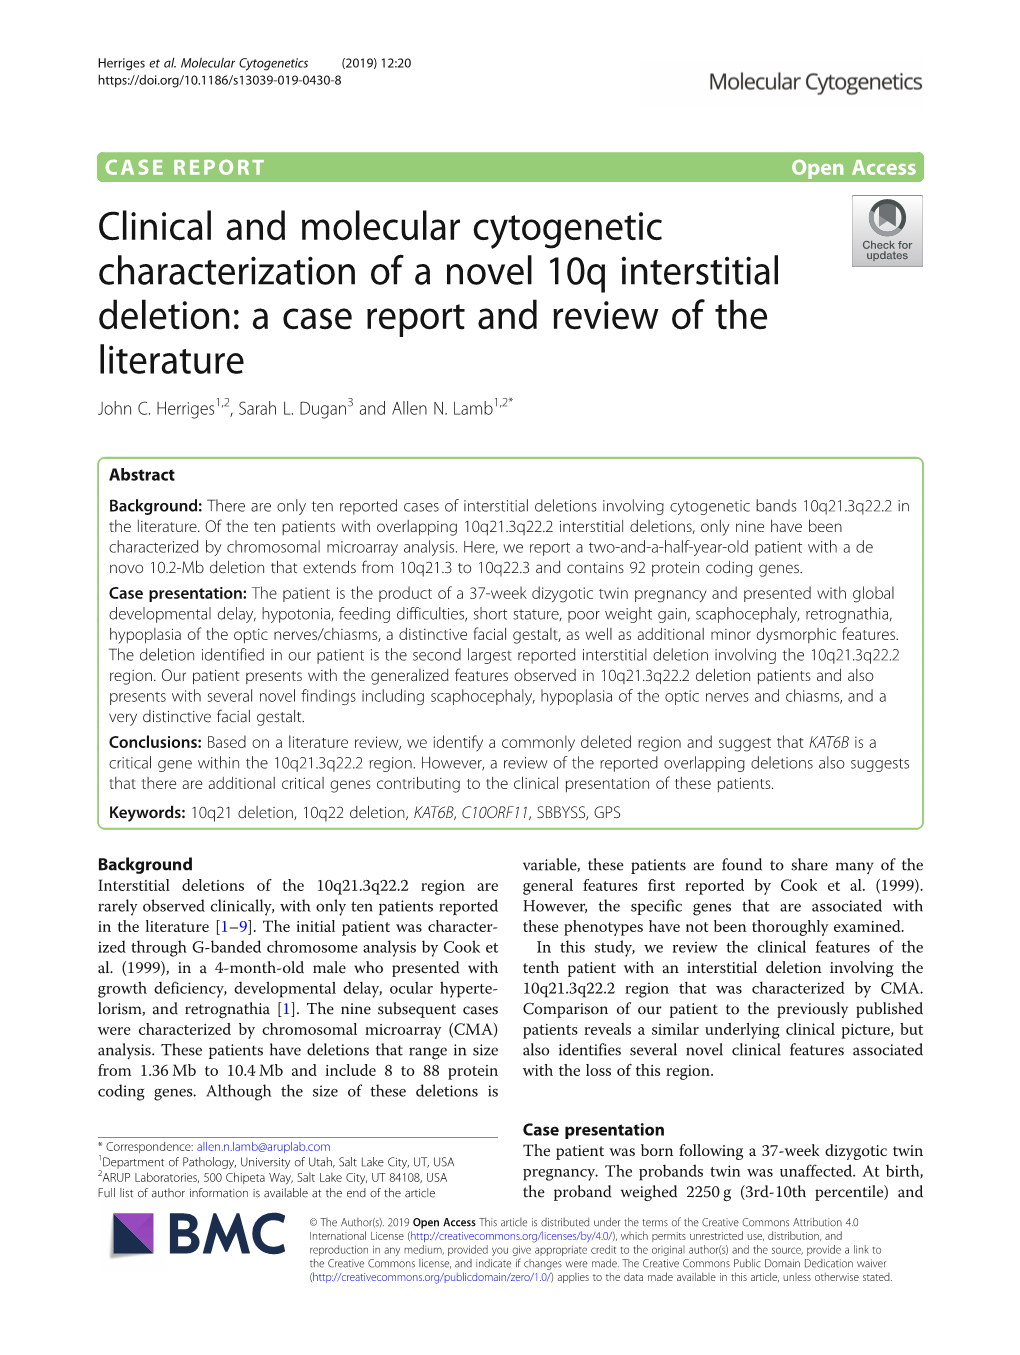 Clinical and Molecular Cytogenetic Characterization of a Novel 10Q Interstitial Deletion: a Case Report and Review of the Literature John C